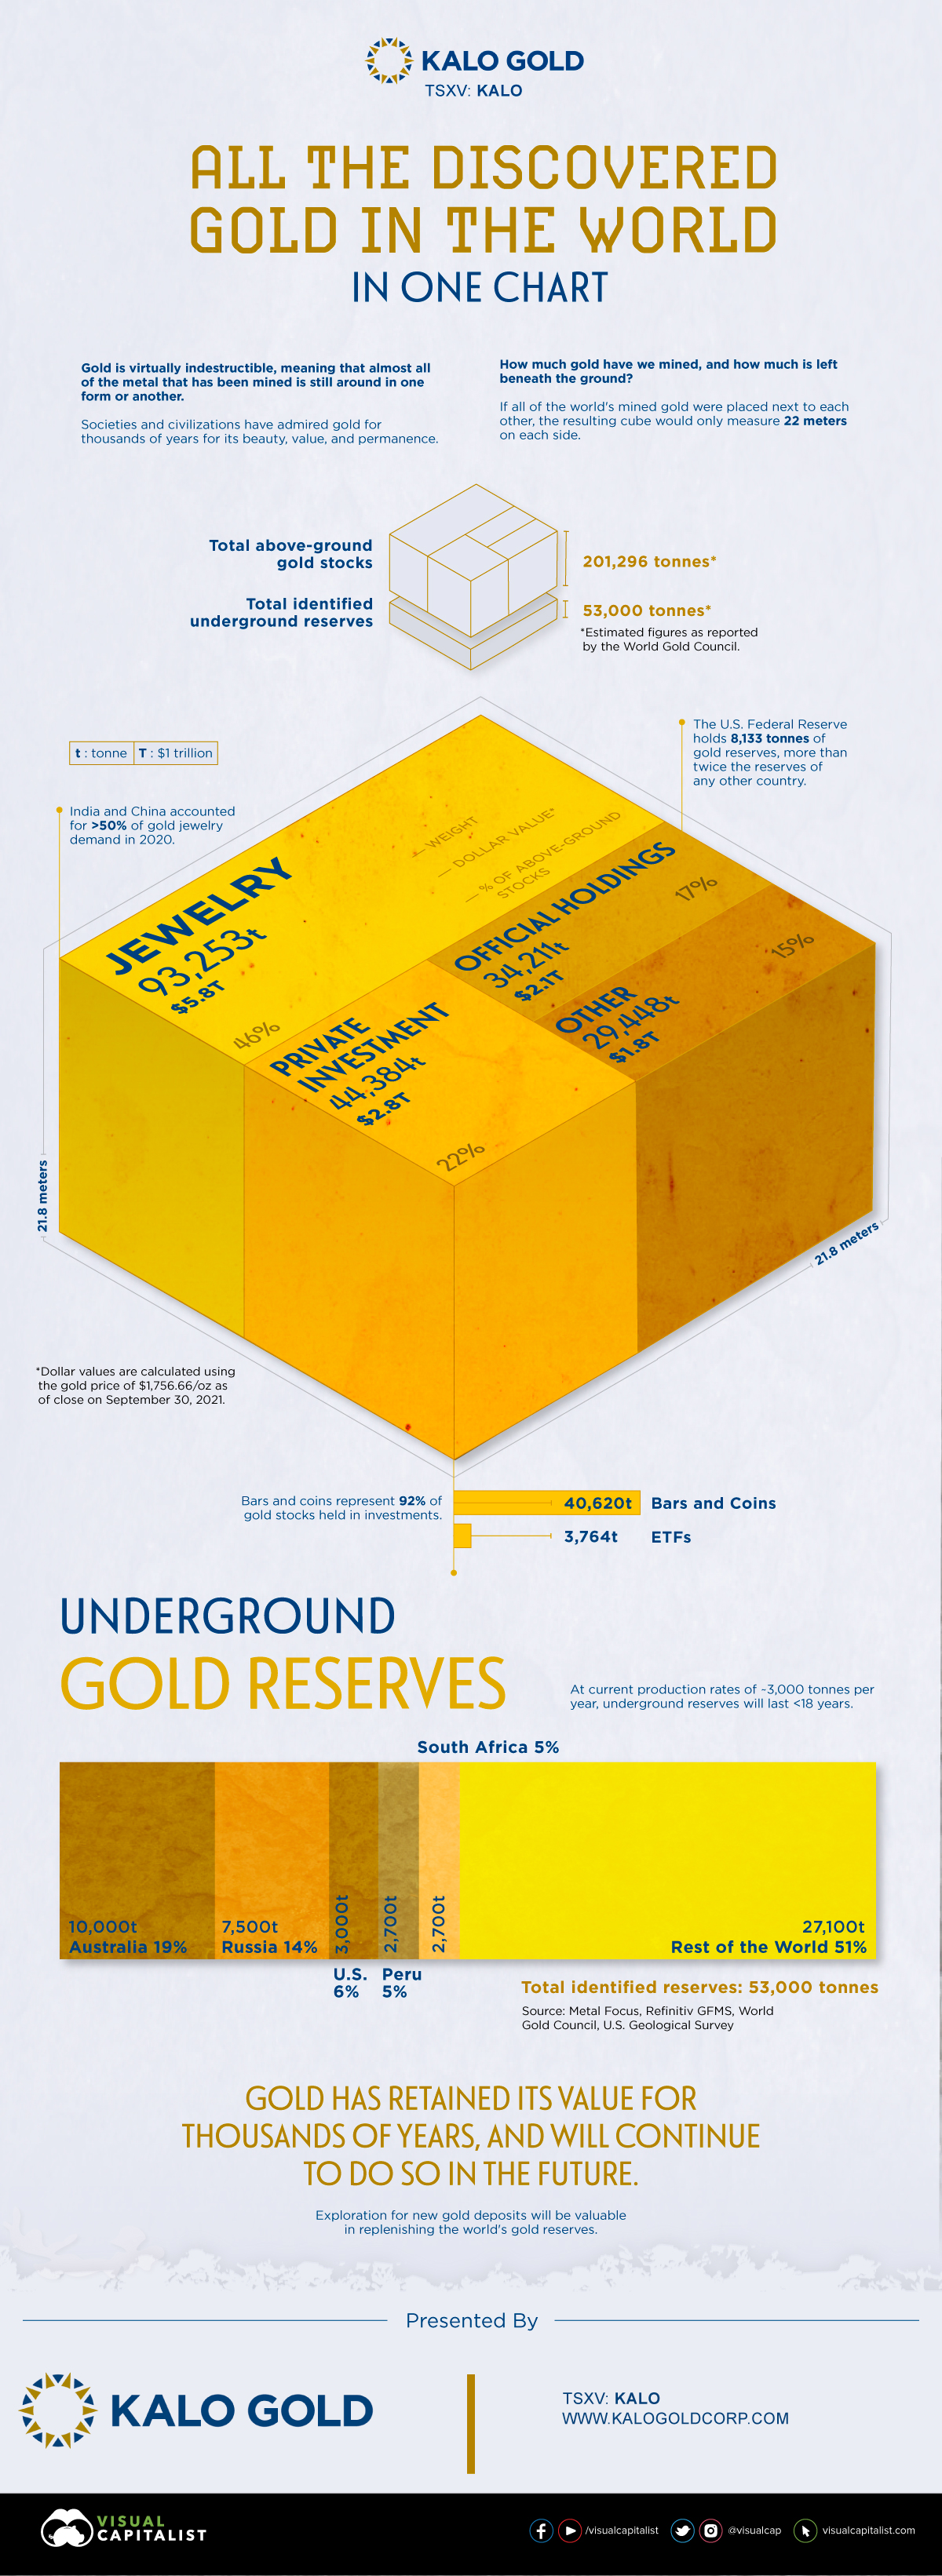 How much gold is in the world?